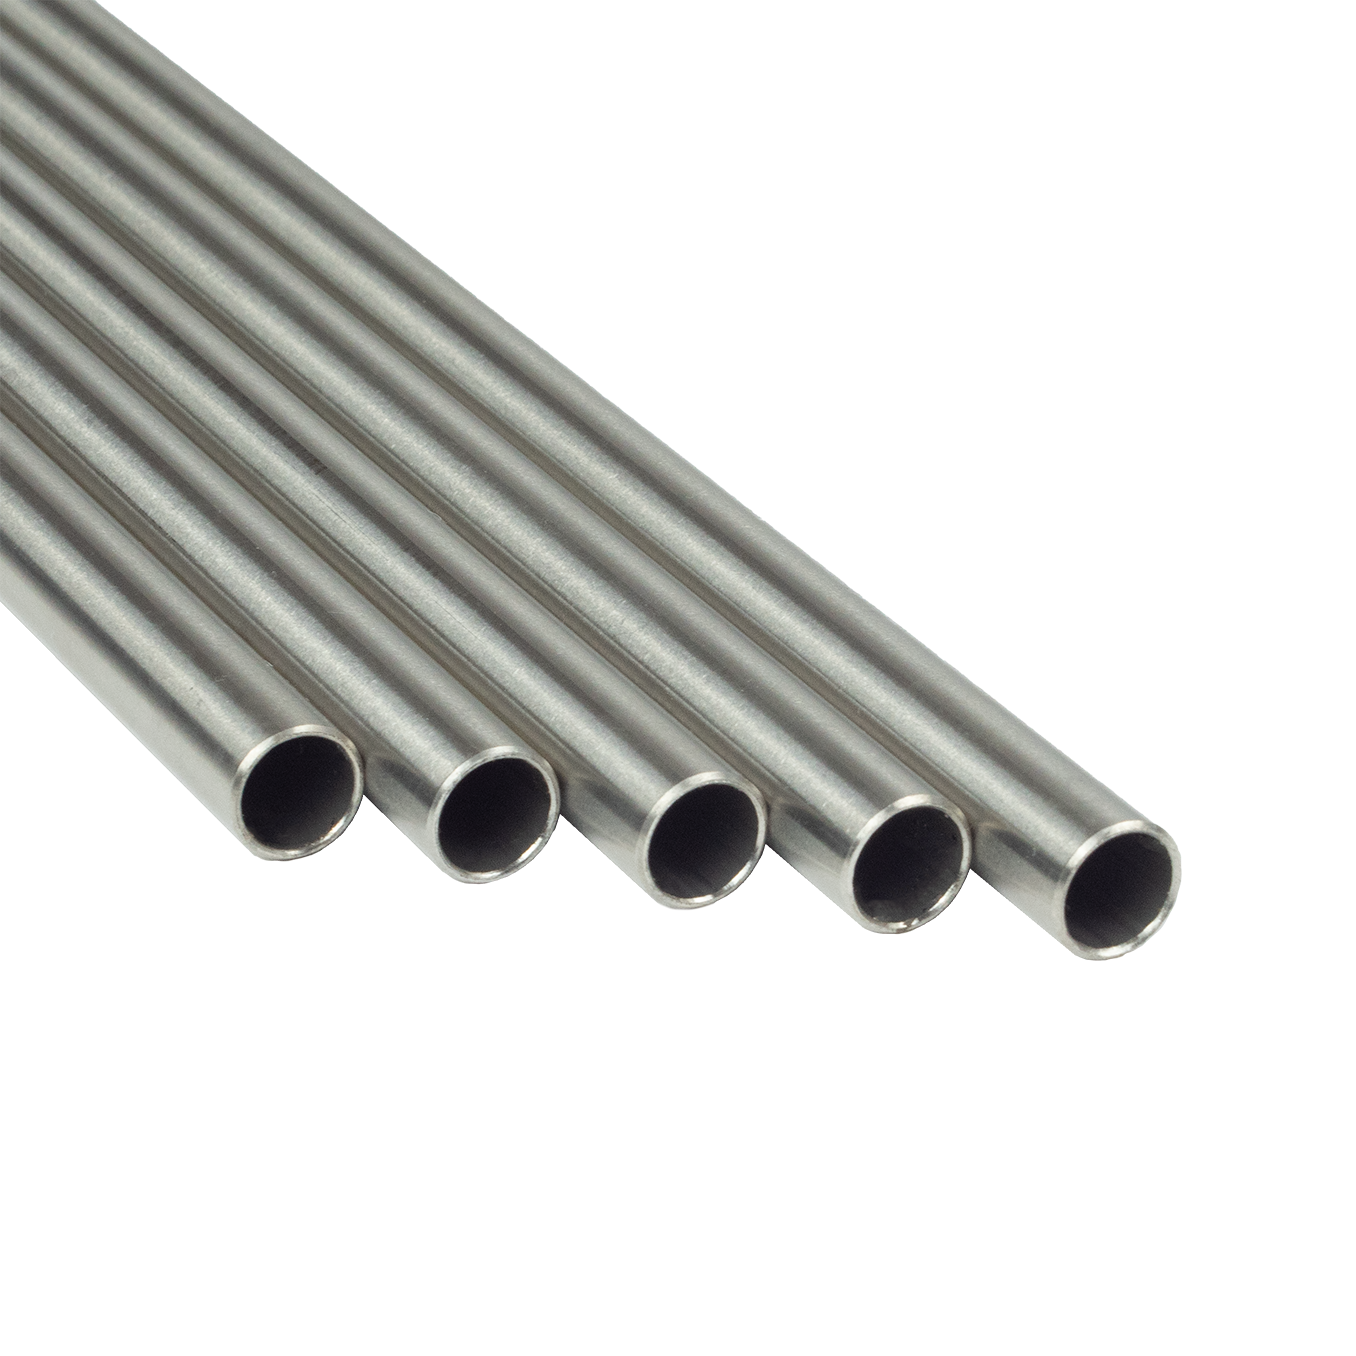 SFS Stand Tube - Ø 13 x 1 mm, length 400 mm - stainless steel